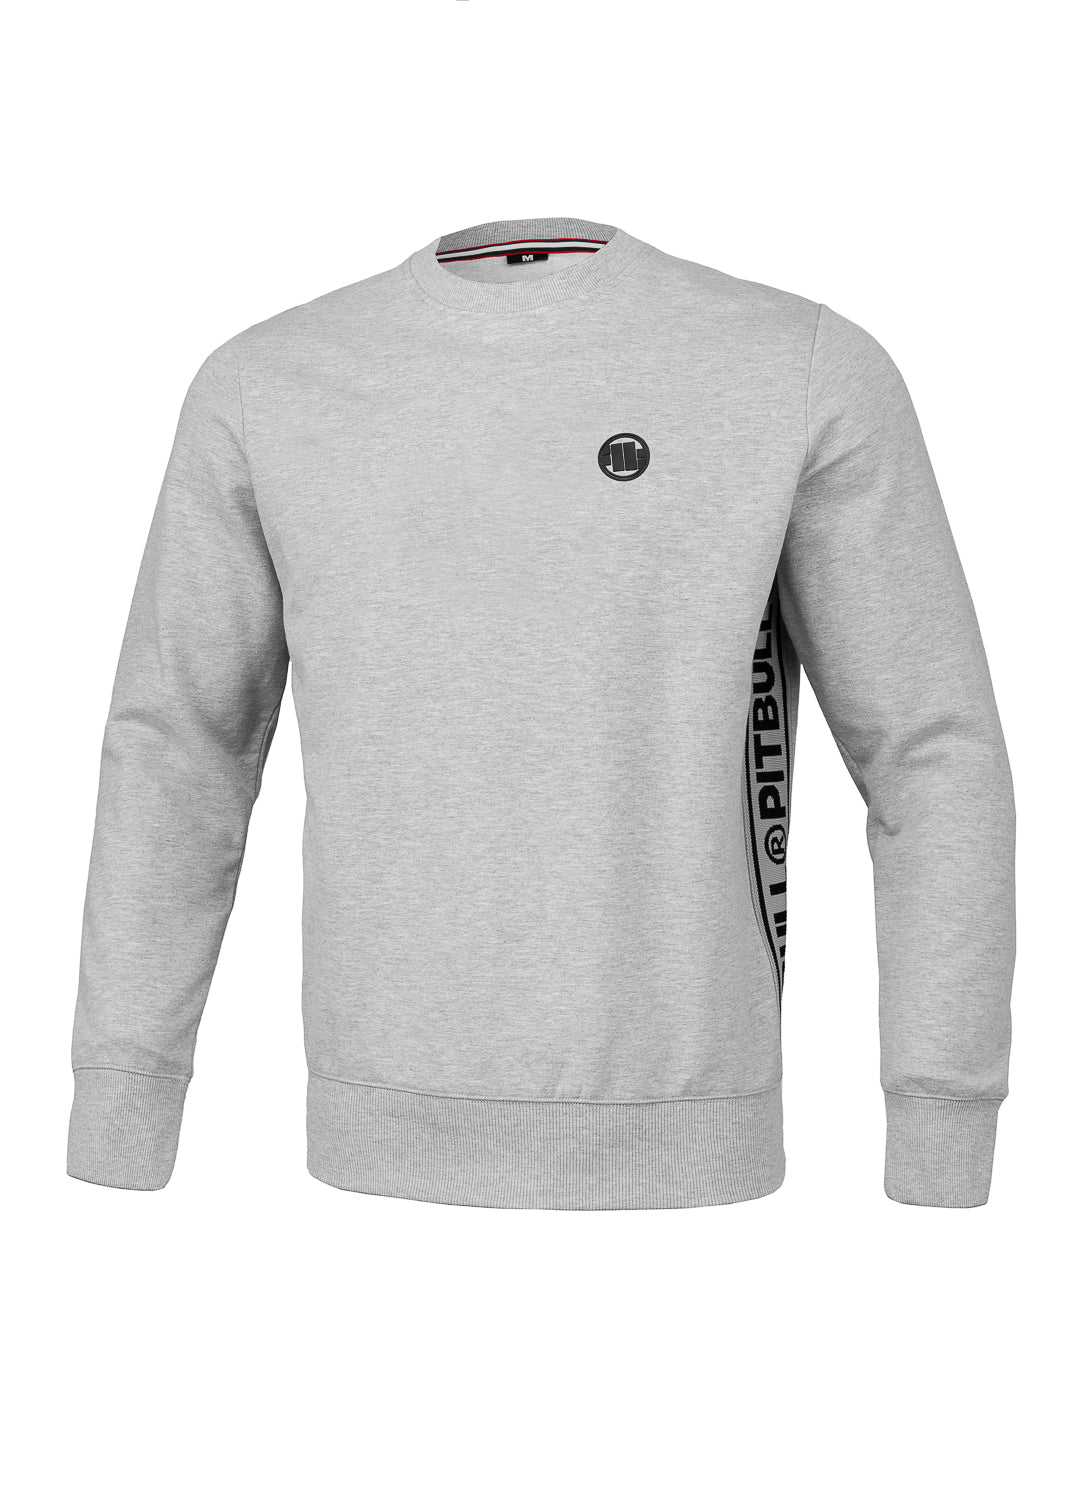 ASCOT French Terry Grey Crewneck.